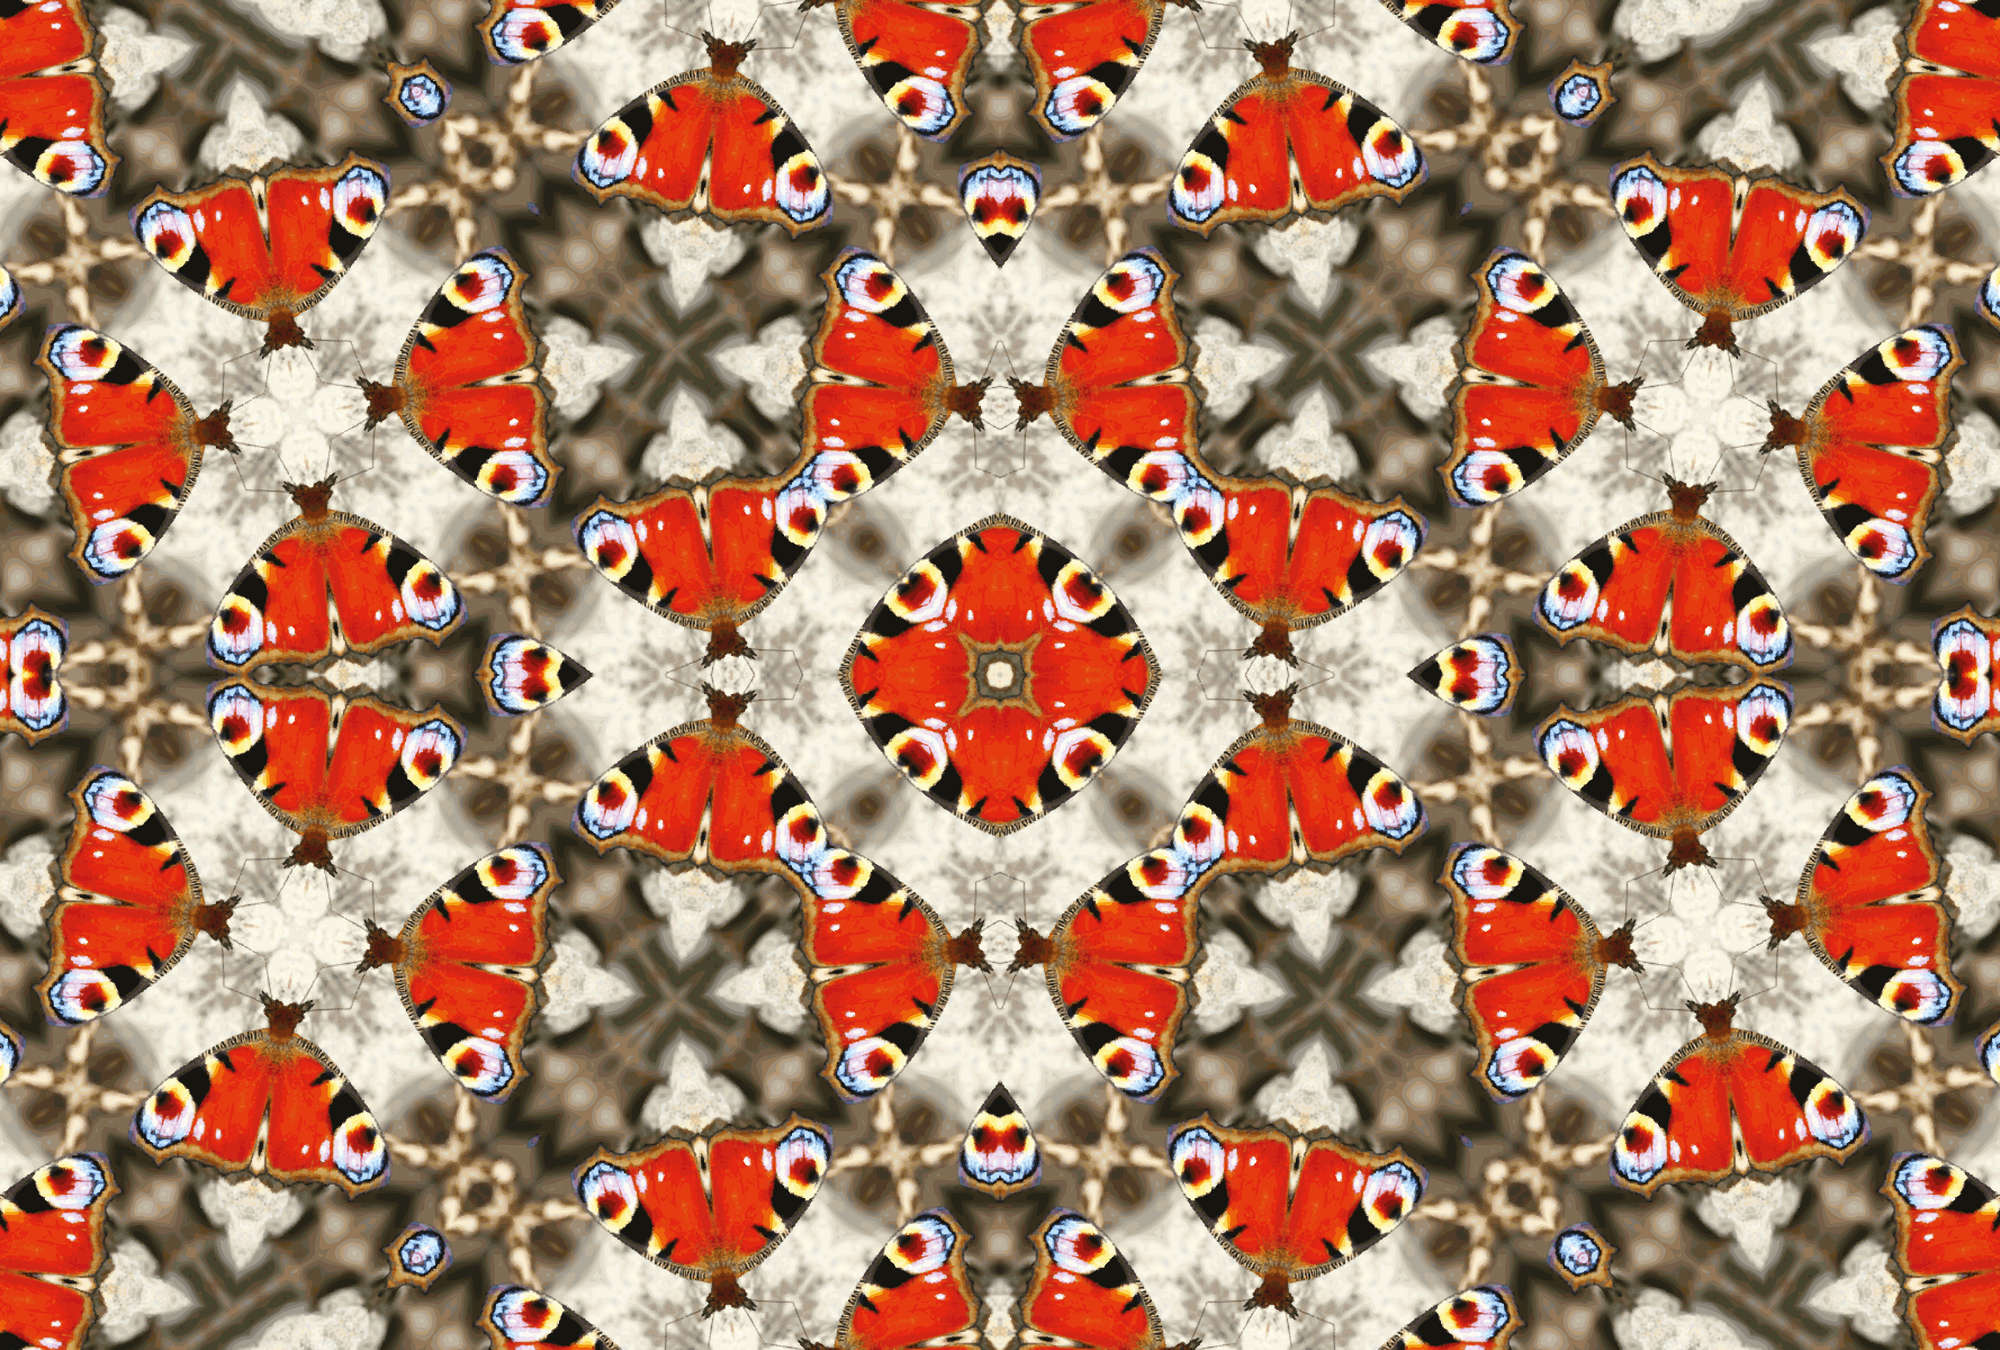             Photo wallpaper with butterfly & kaleidoscope effect
        